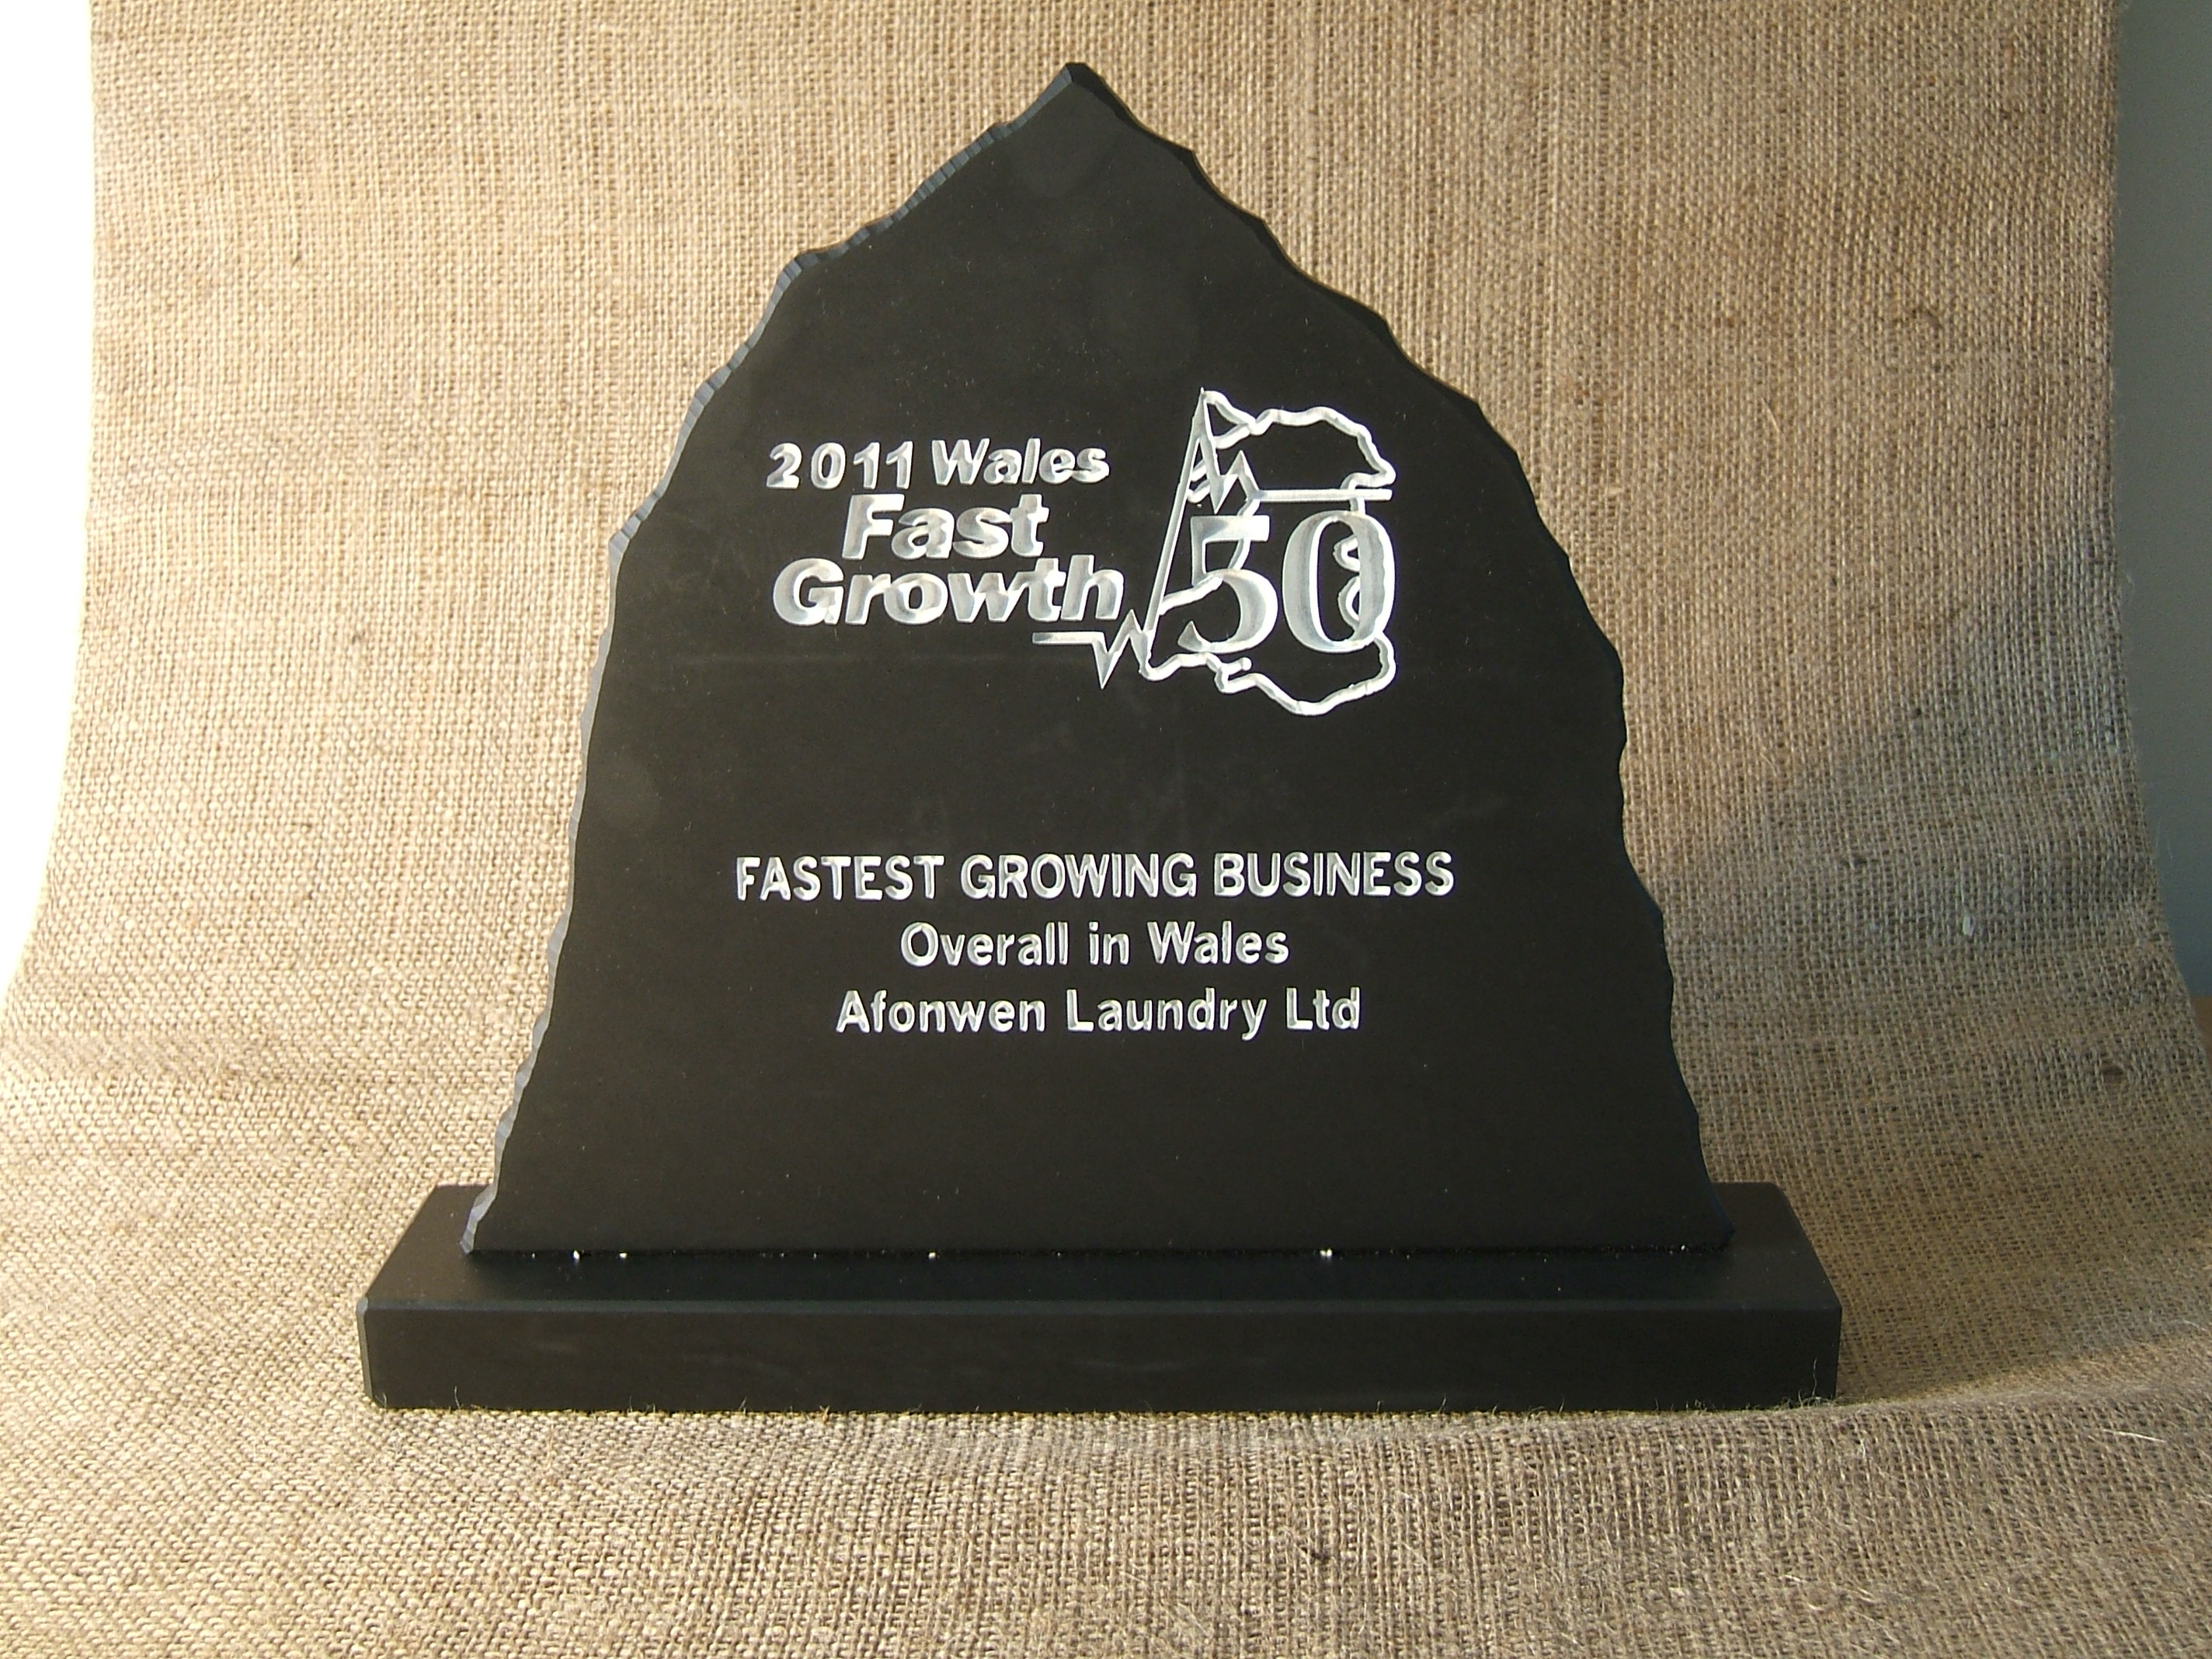 FAST GROWTH 2011 AWARDS